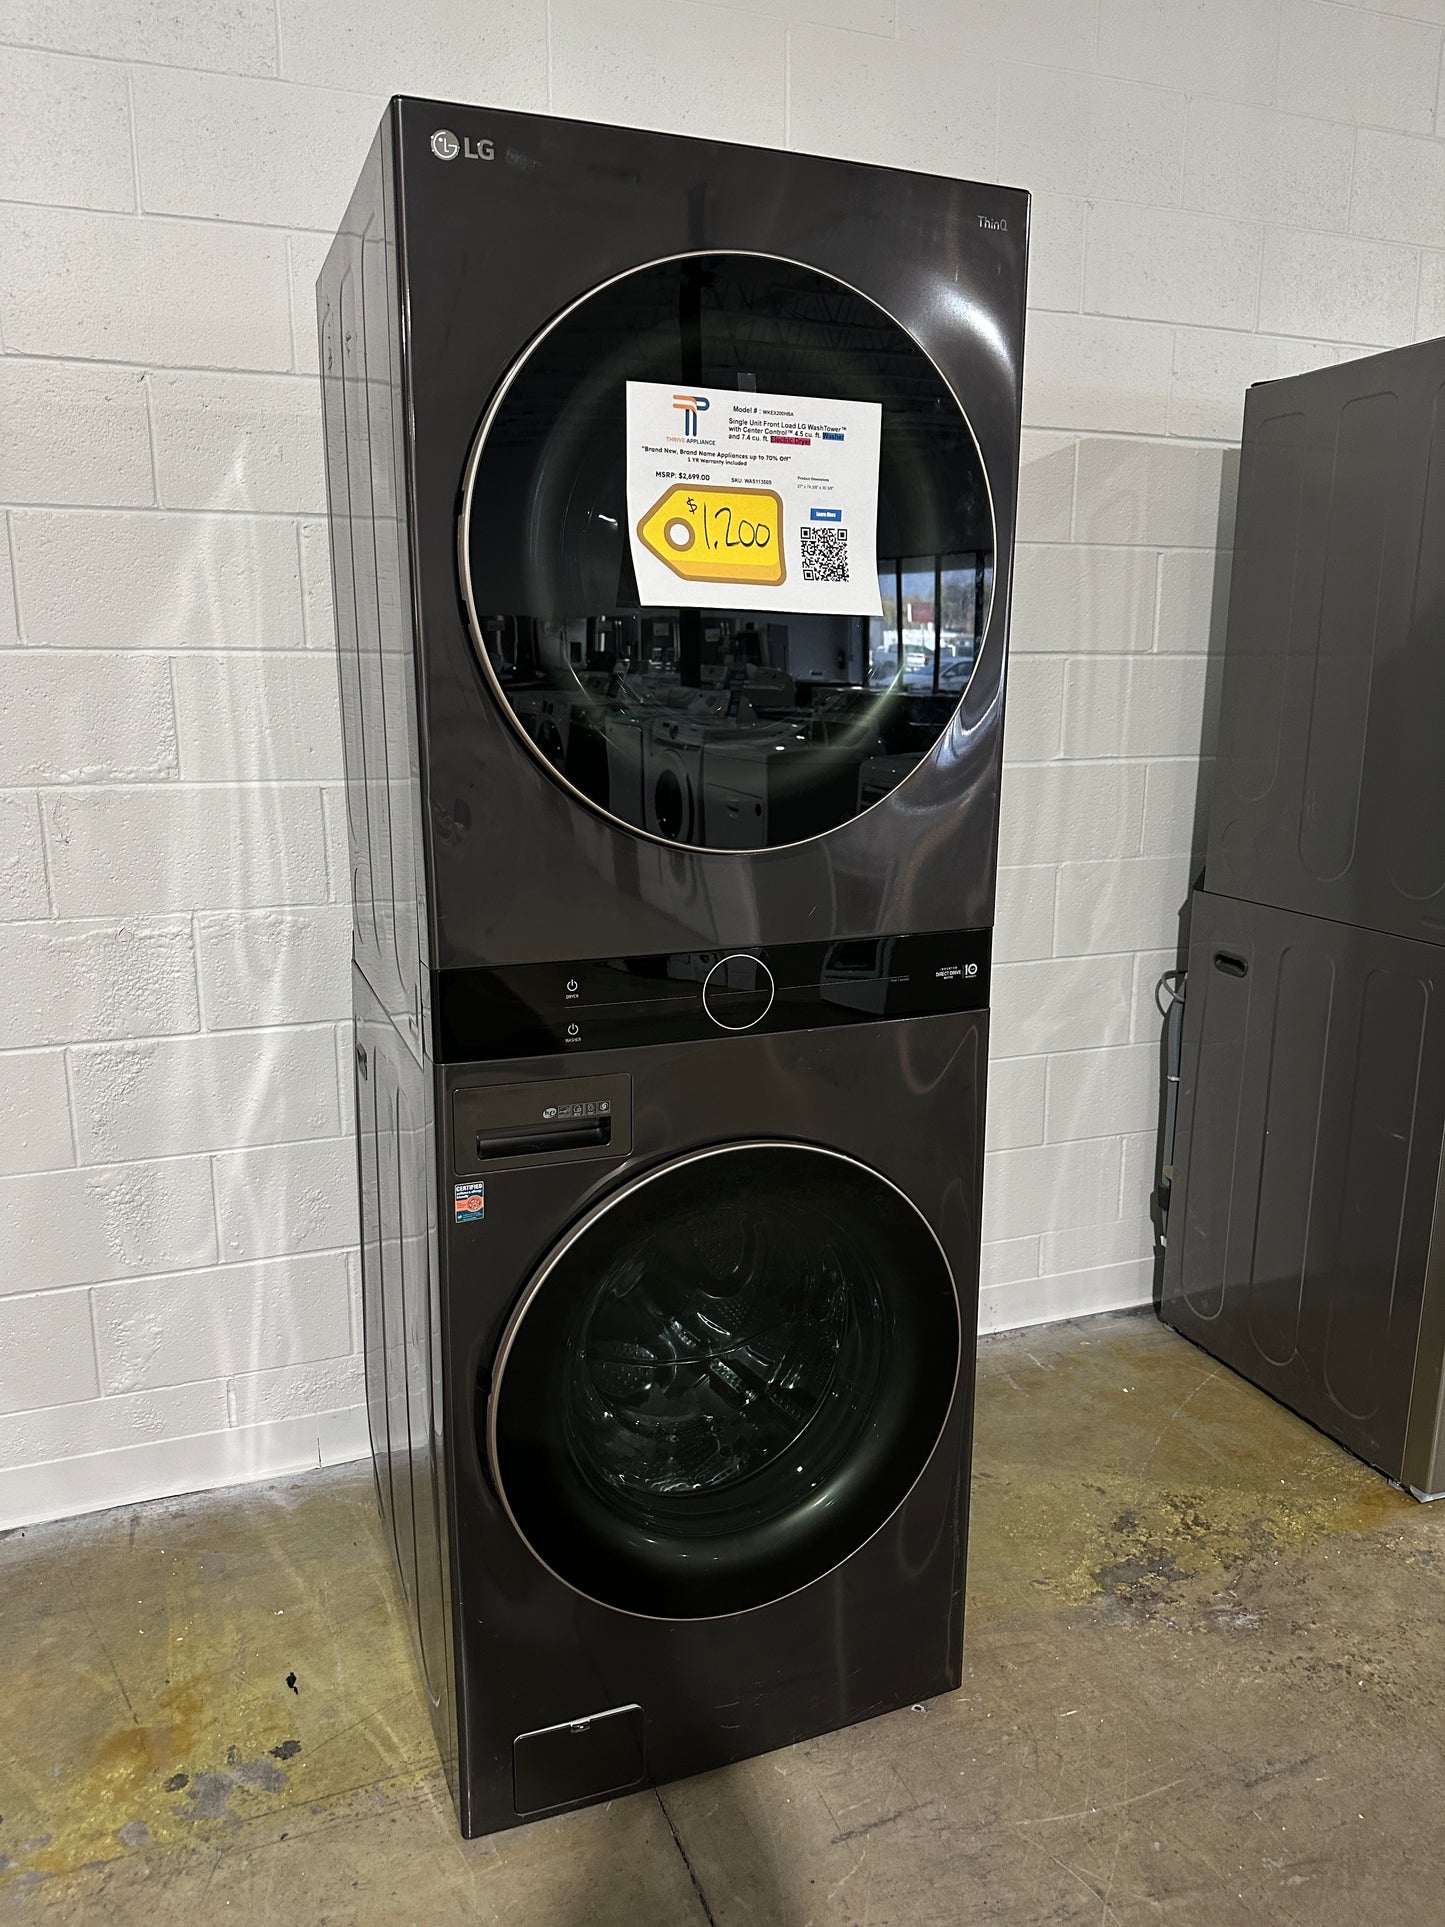 DISCOUNTED GORGEOUS BLACK STEEL ELECTRIC WASHTOWER from LG - WAS11350S WKEX200HBA